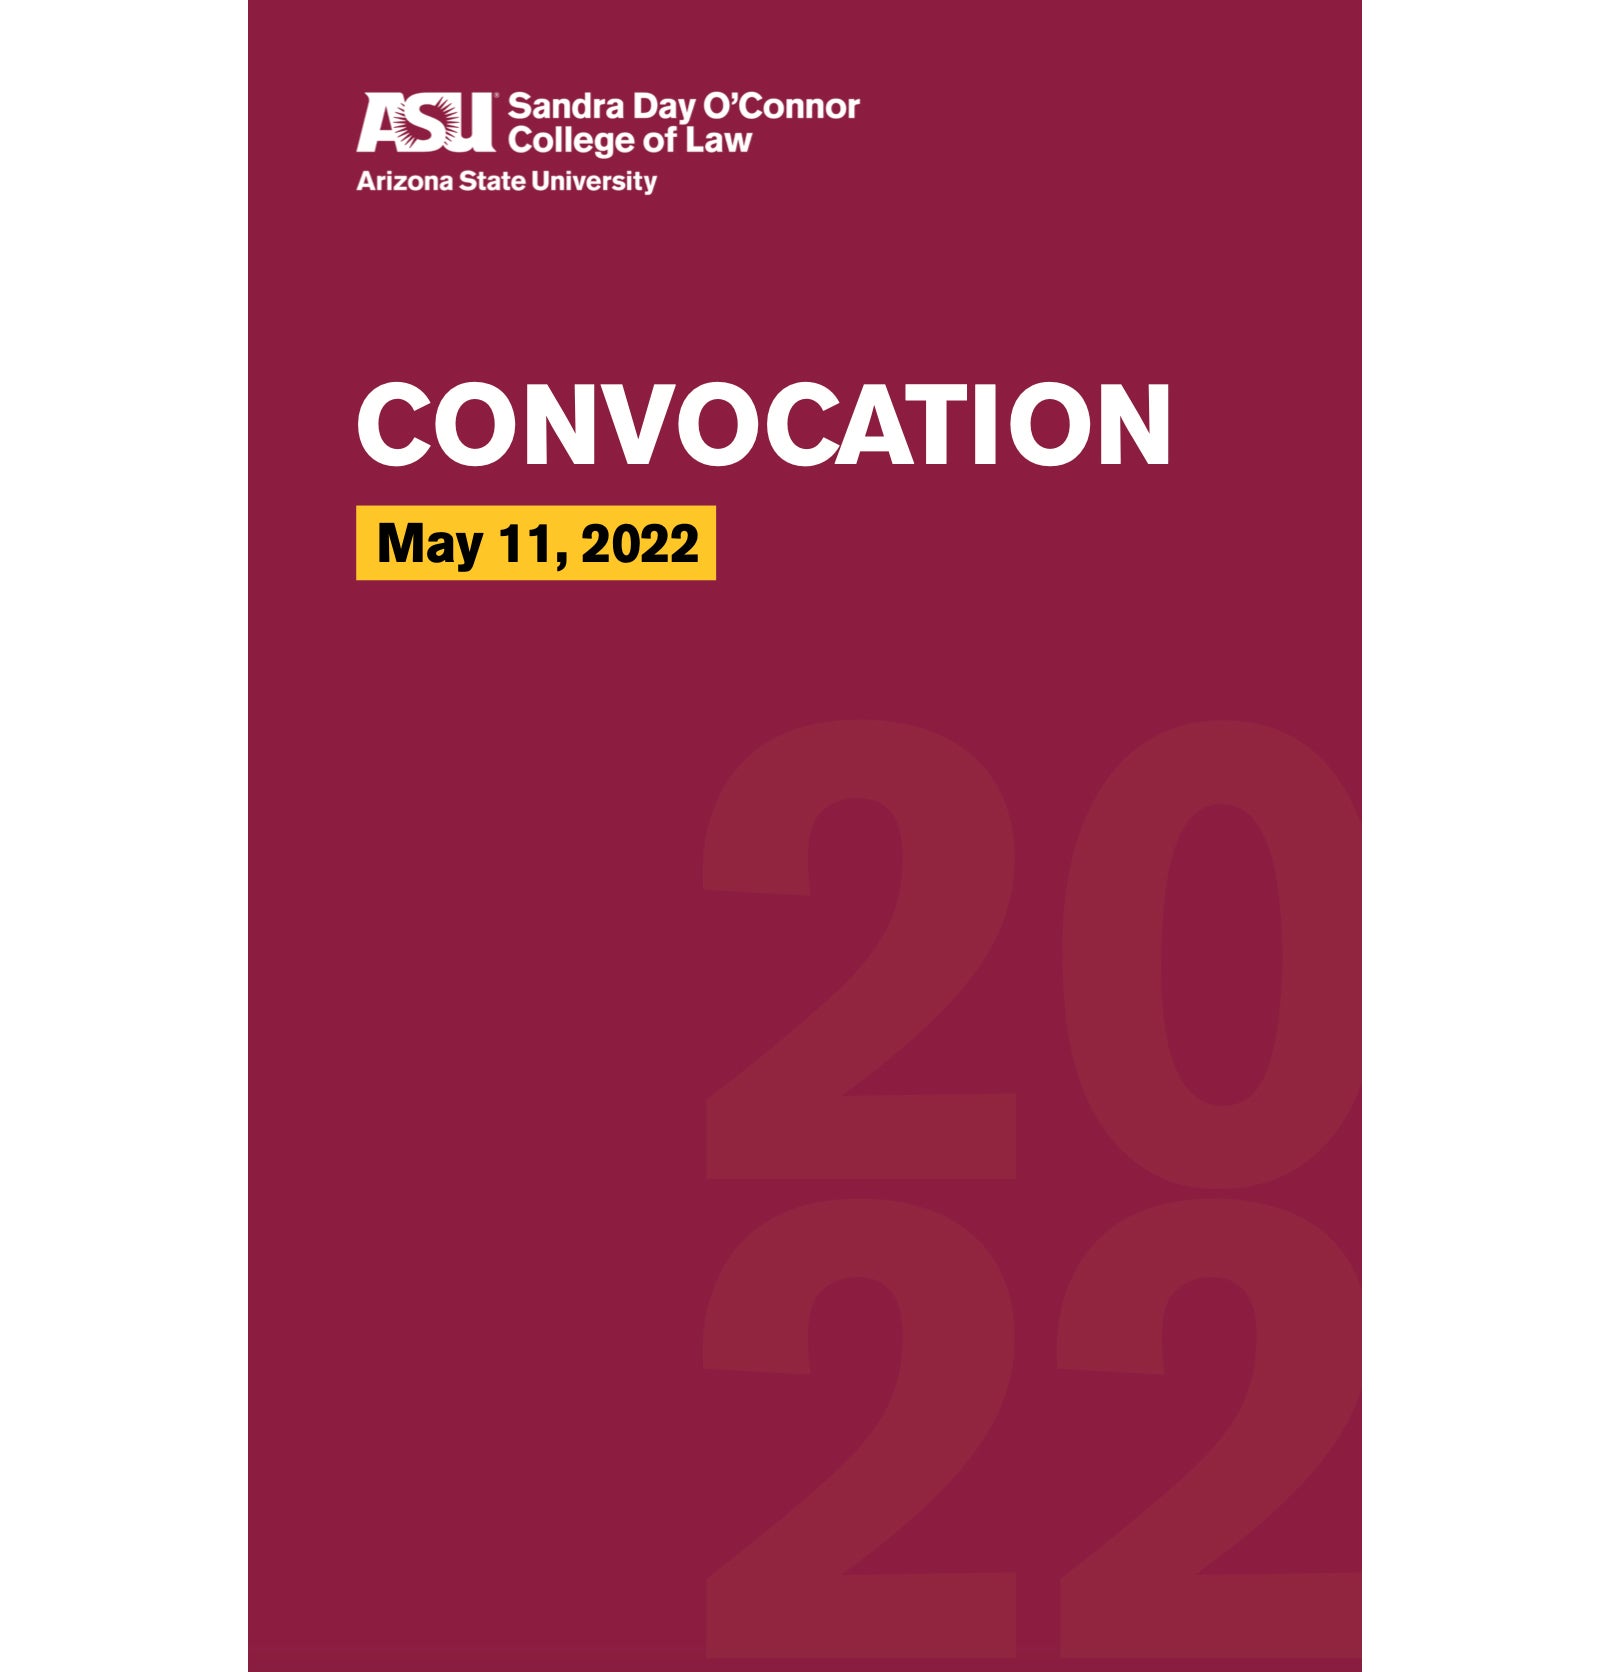 Front page of the Spring 2022 Graduation Program